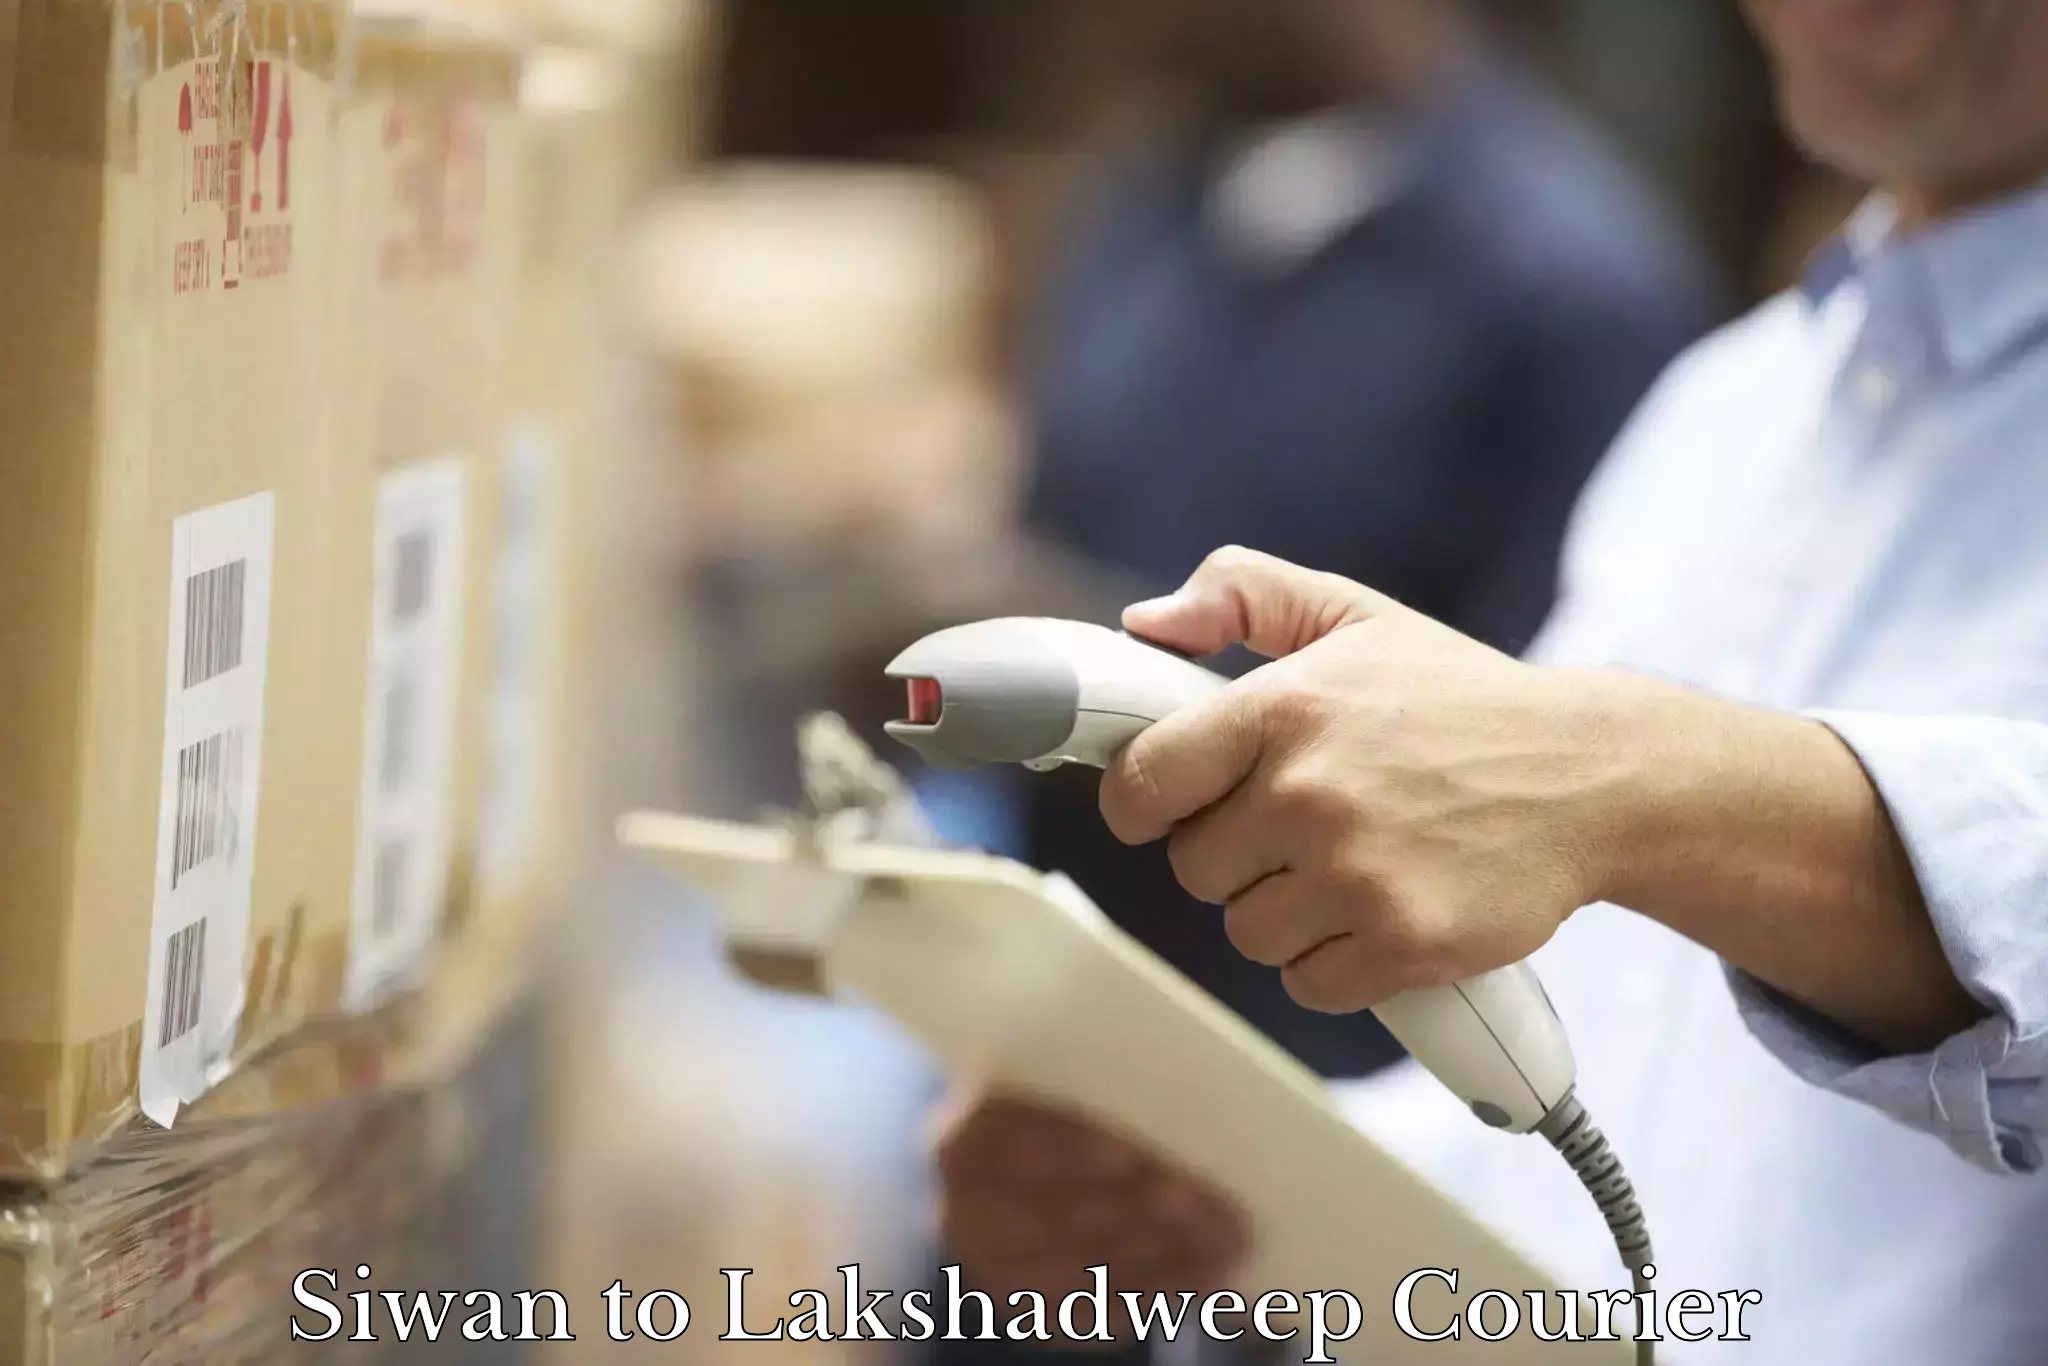 Reliable courier service in Siwan to Lakshadweep